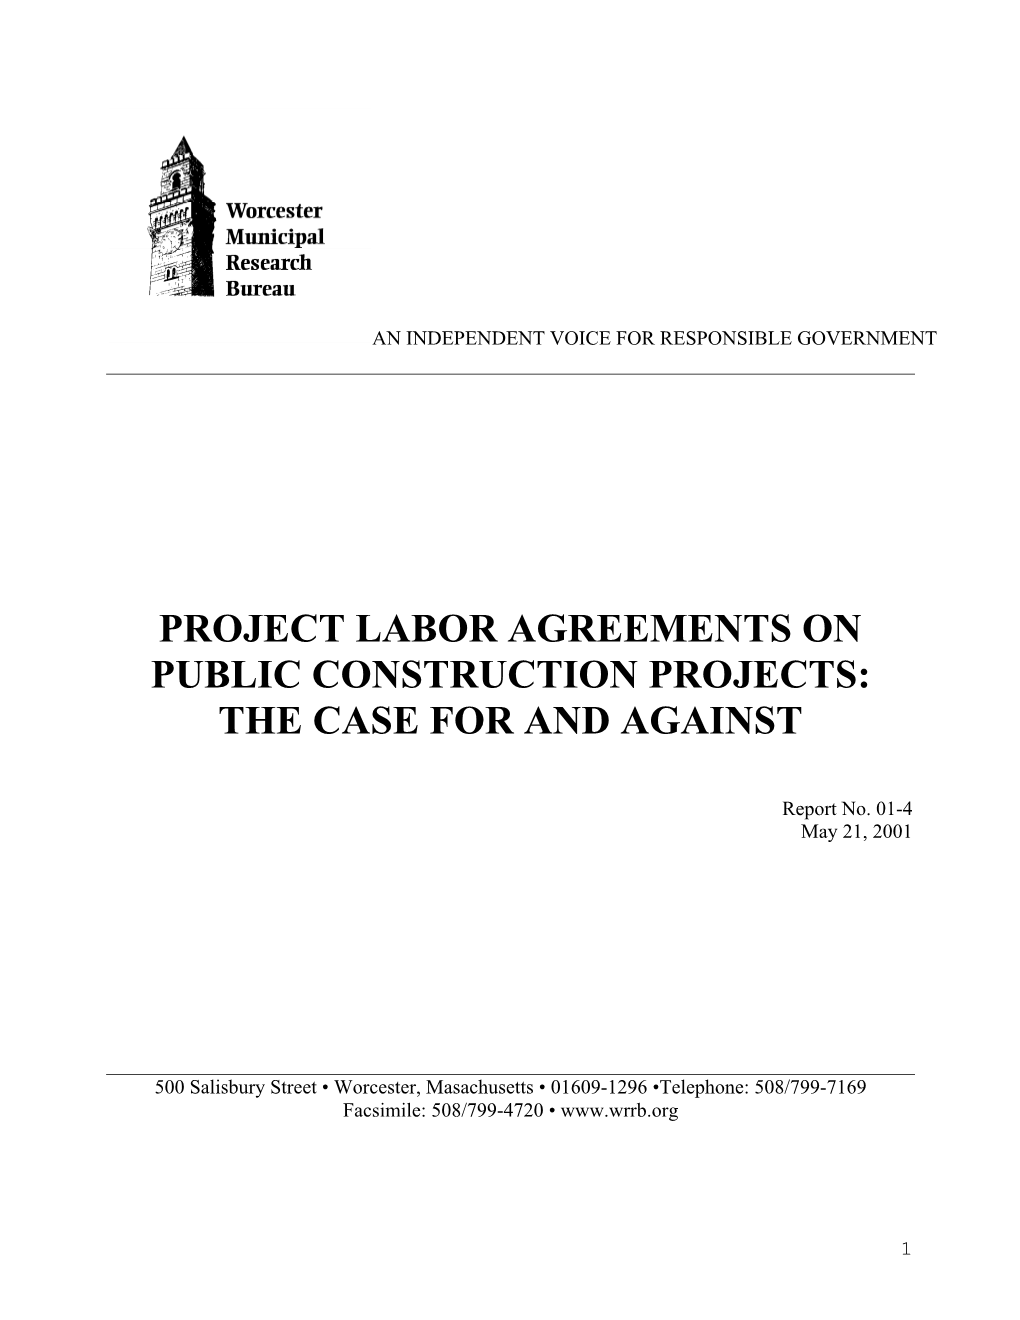 Project Labor Agreements on Public Construction Projects: the Case for and Against